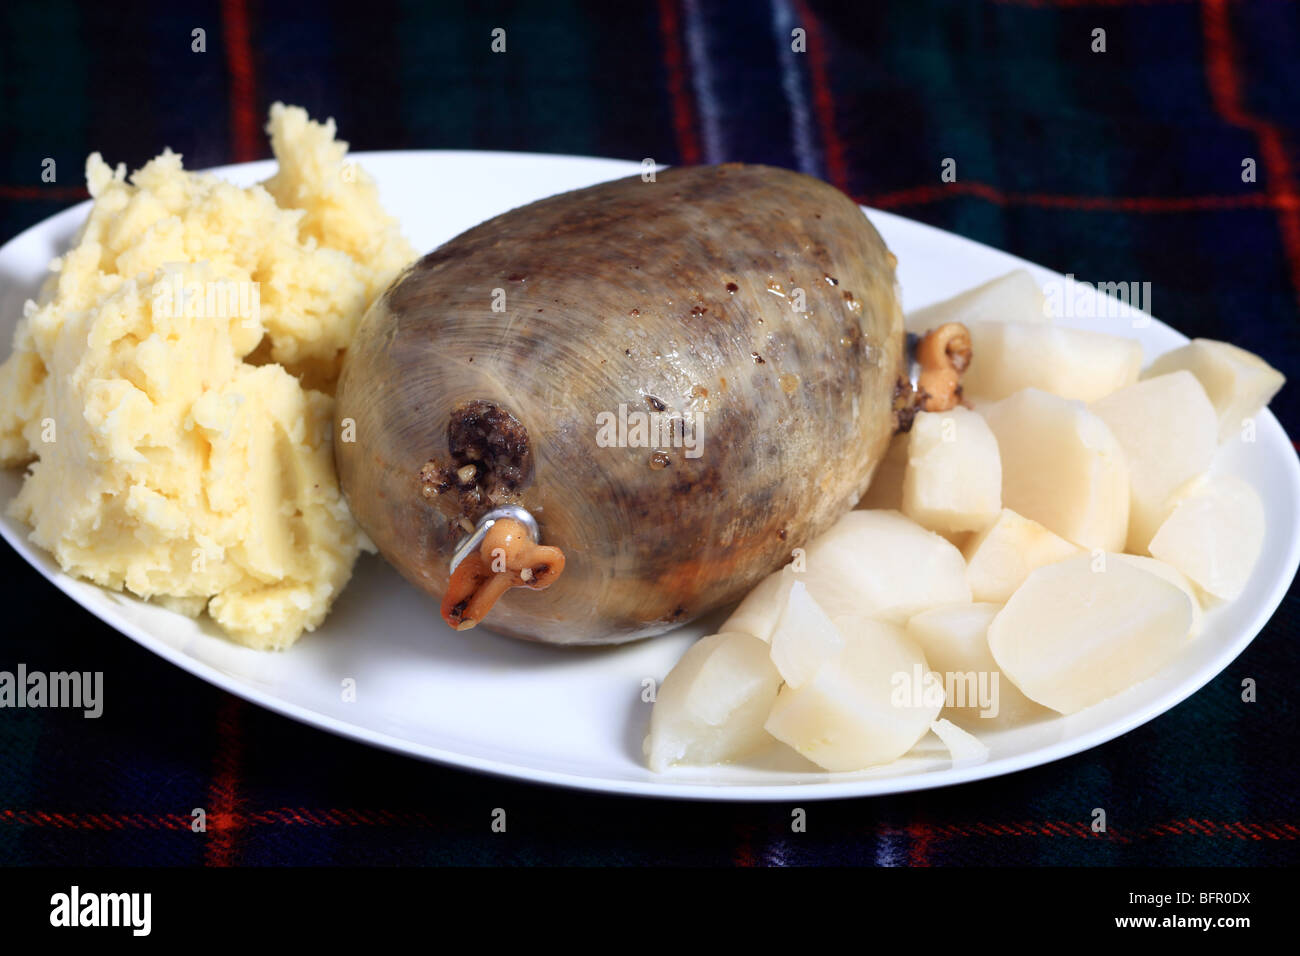 A serving dish with a whole haggis, diced turnips and mashed potatoes. Stock Photo